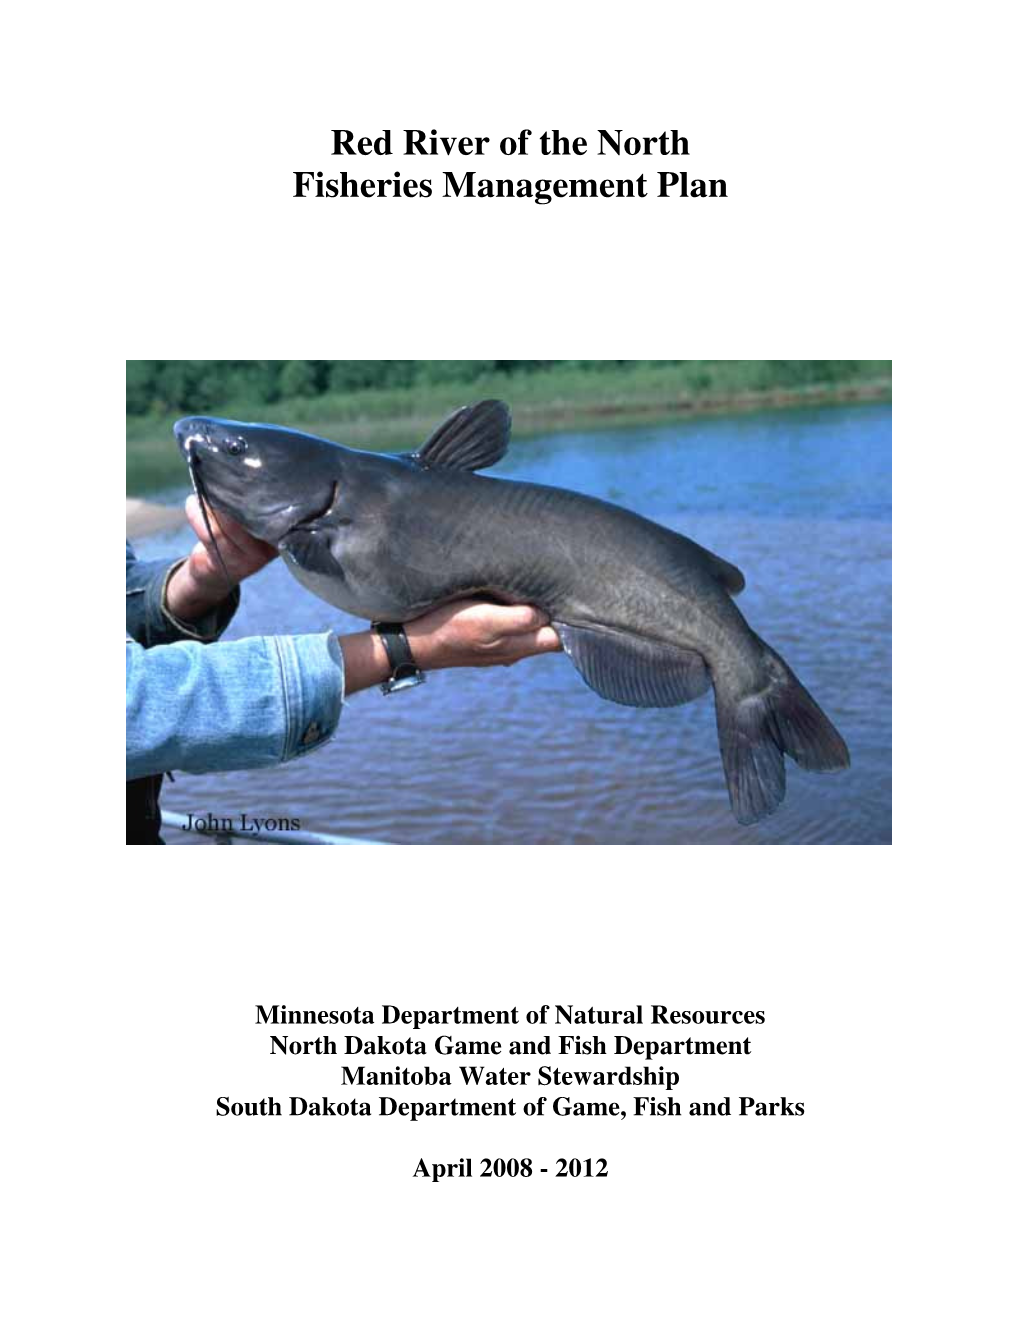 Red River of the North Fisheries Management Plan